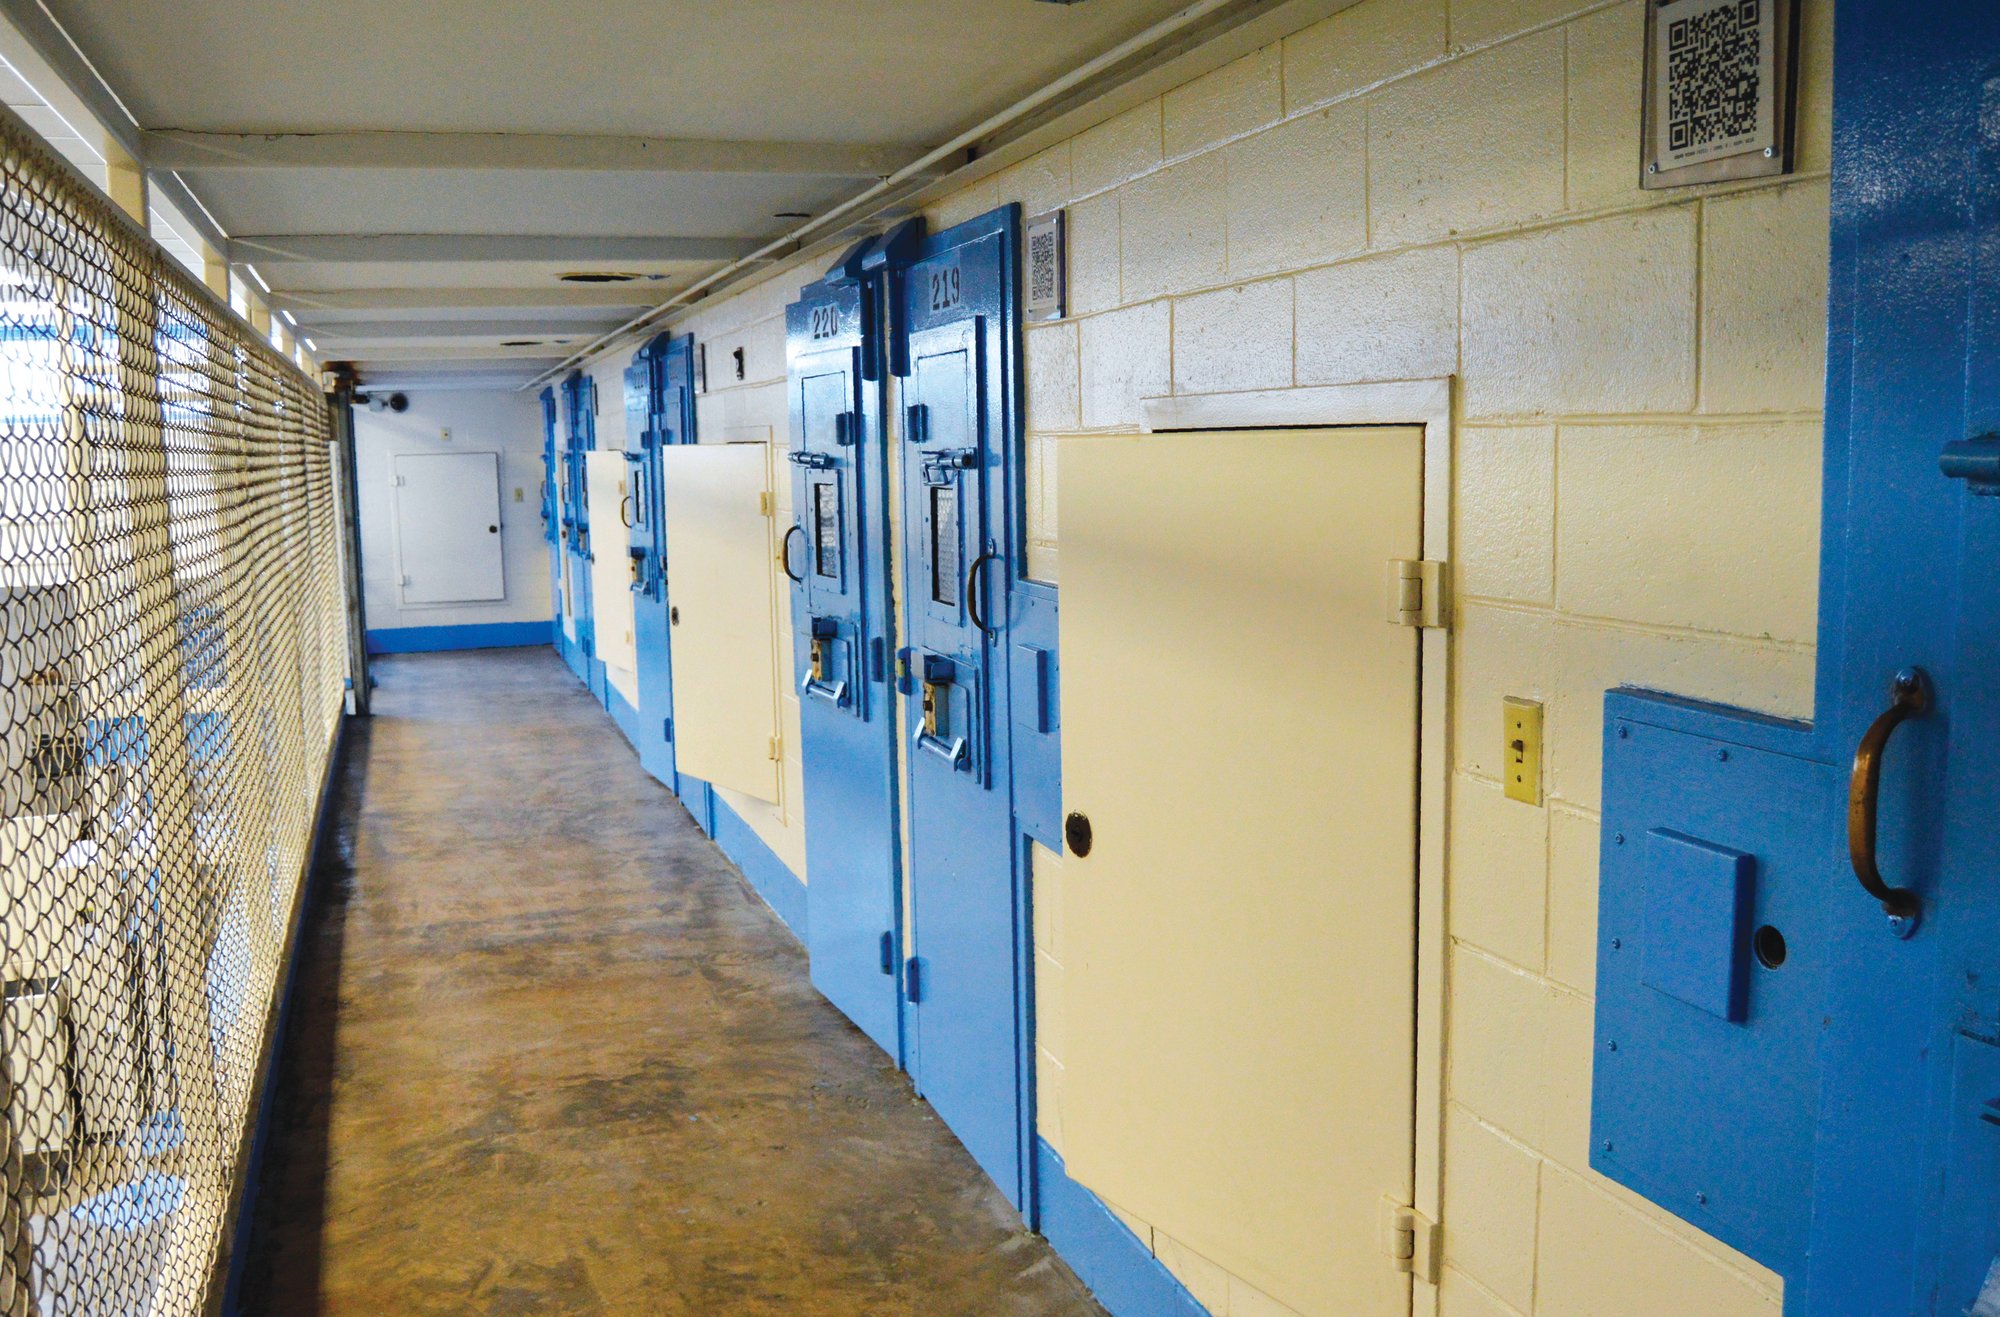 This undated file photo provided on July 11, 2019, by the South Carolina Department of Corrections shows the new death row at Broad River Correctional Institution in Columbia.